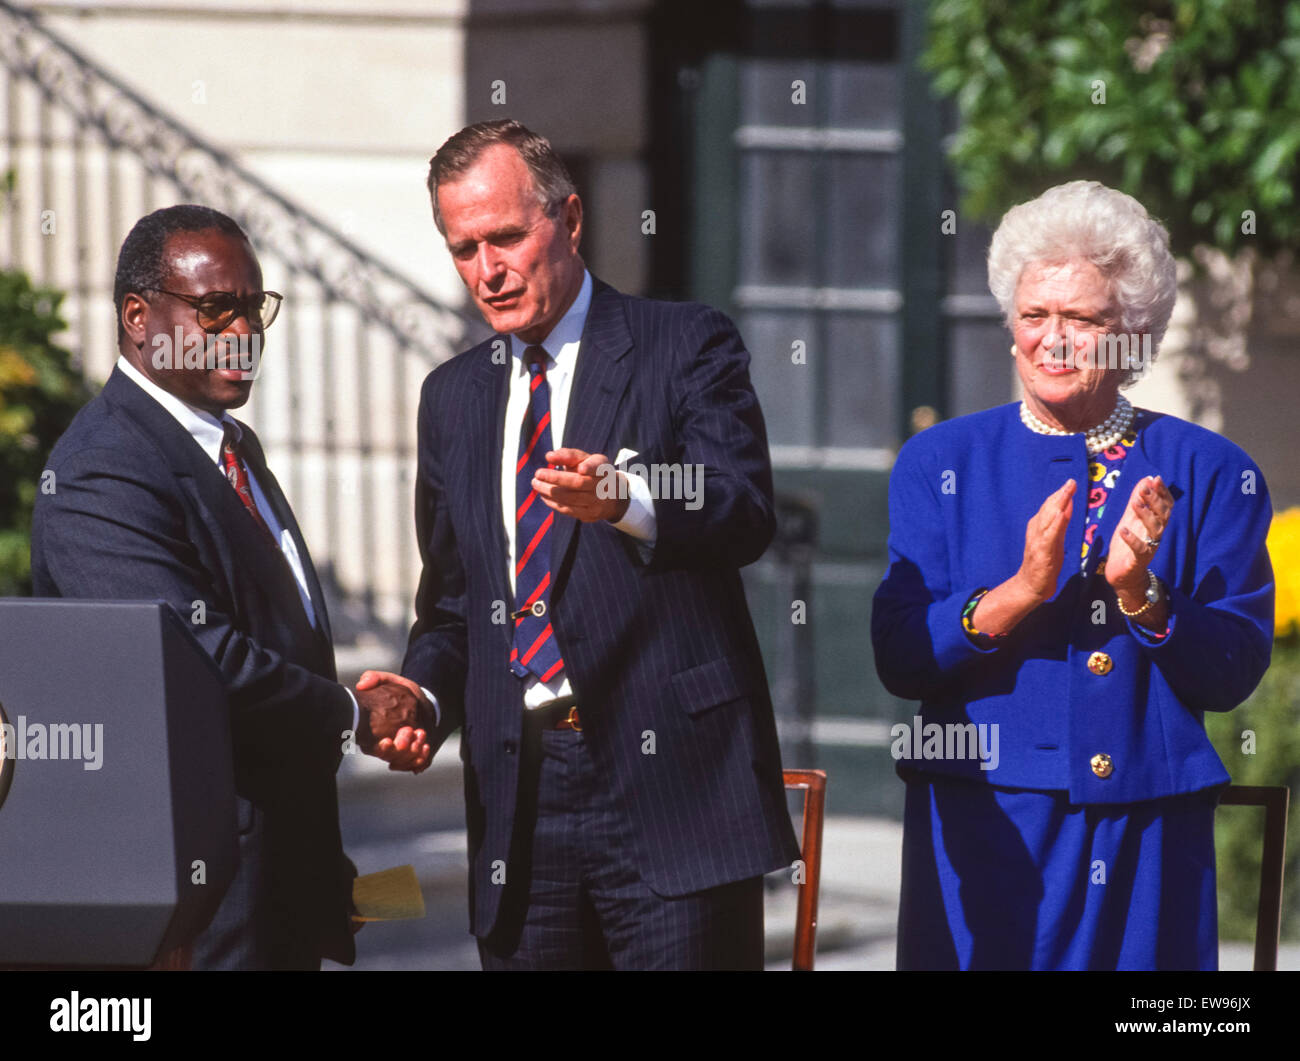 WASHINGTON, DC, USA - Clarence Thomas, U. S. Supreme Court nominee, swearing in ceremony at White House, with President George H. W. Bush and First Lady Barbara Bush. October 18, 1991 Stock Photo